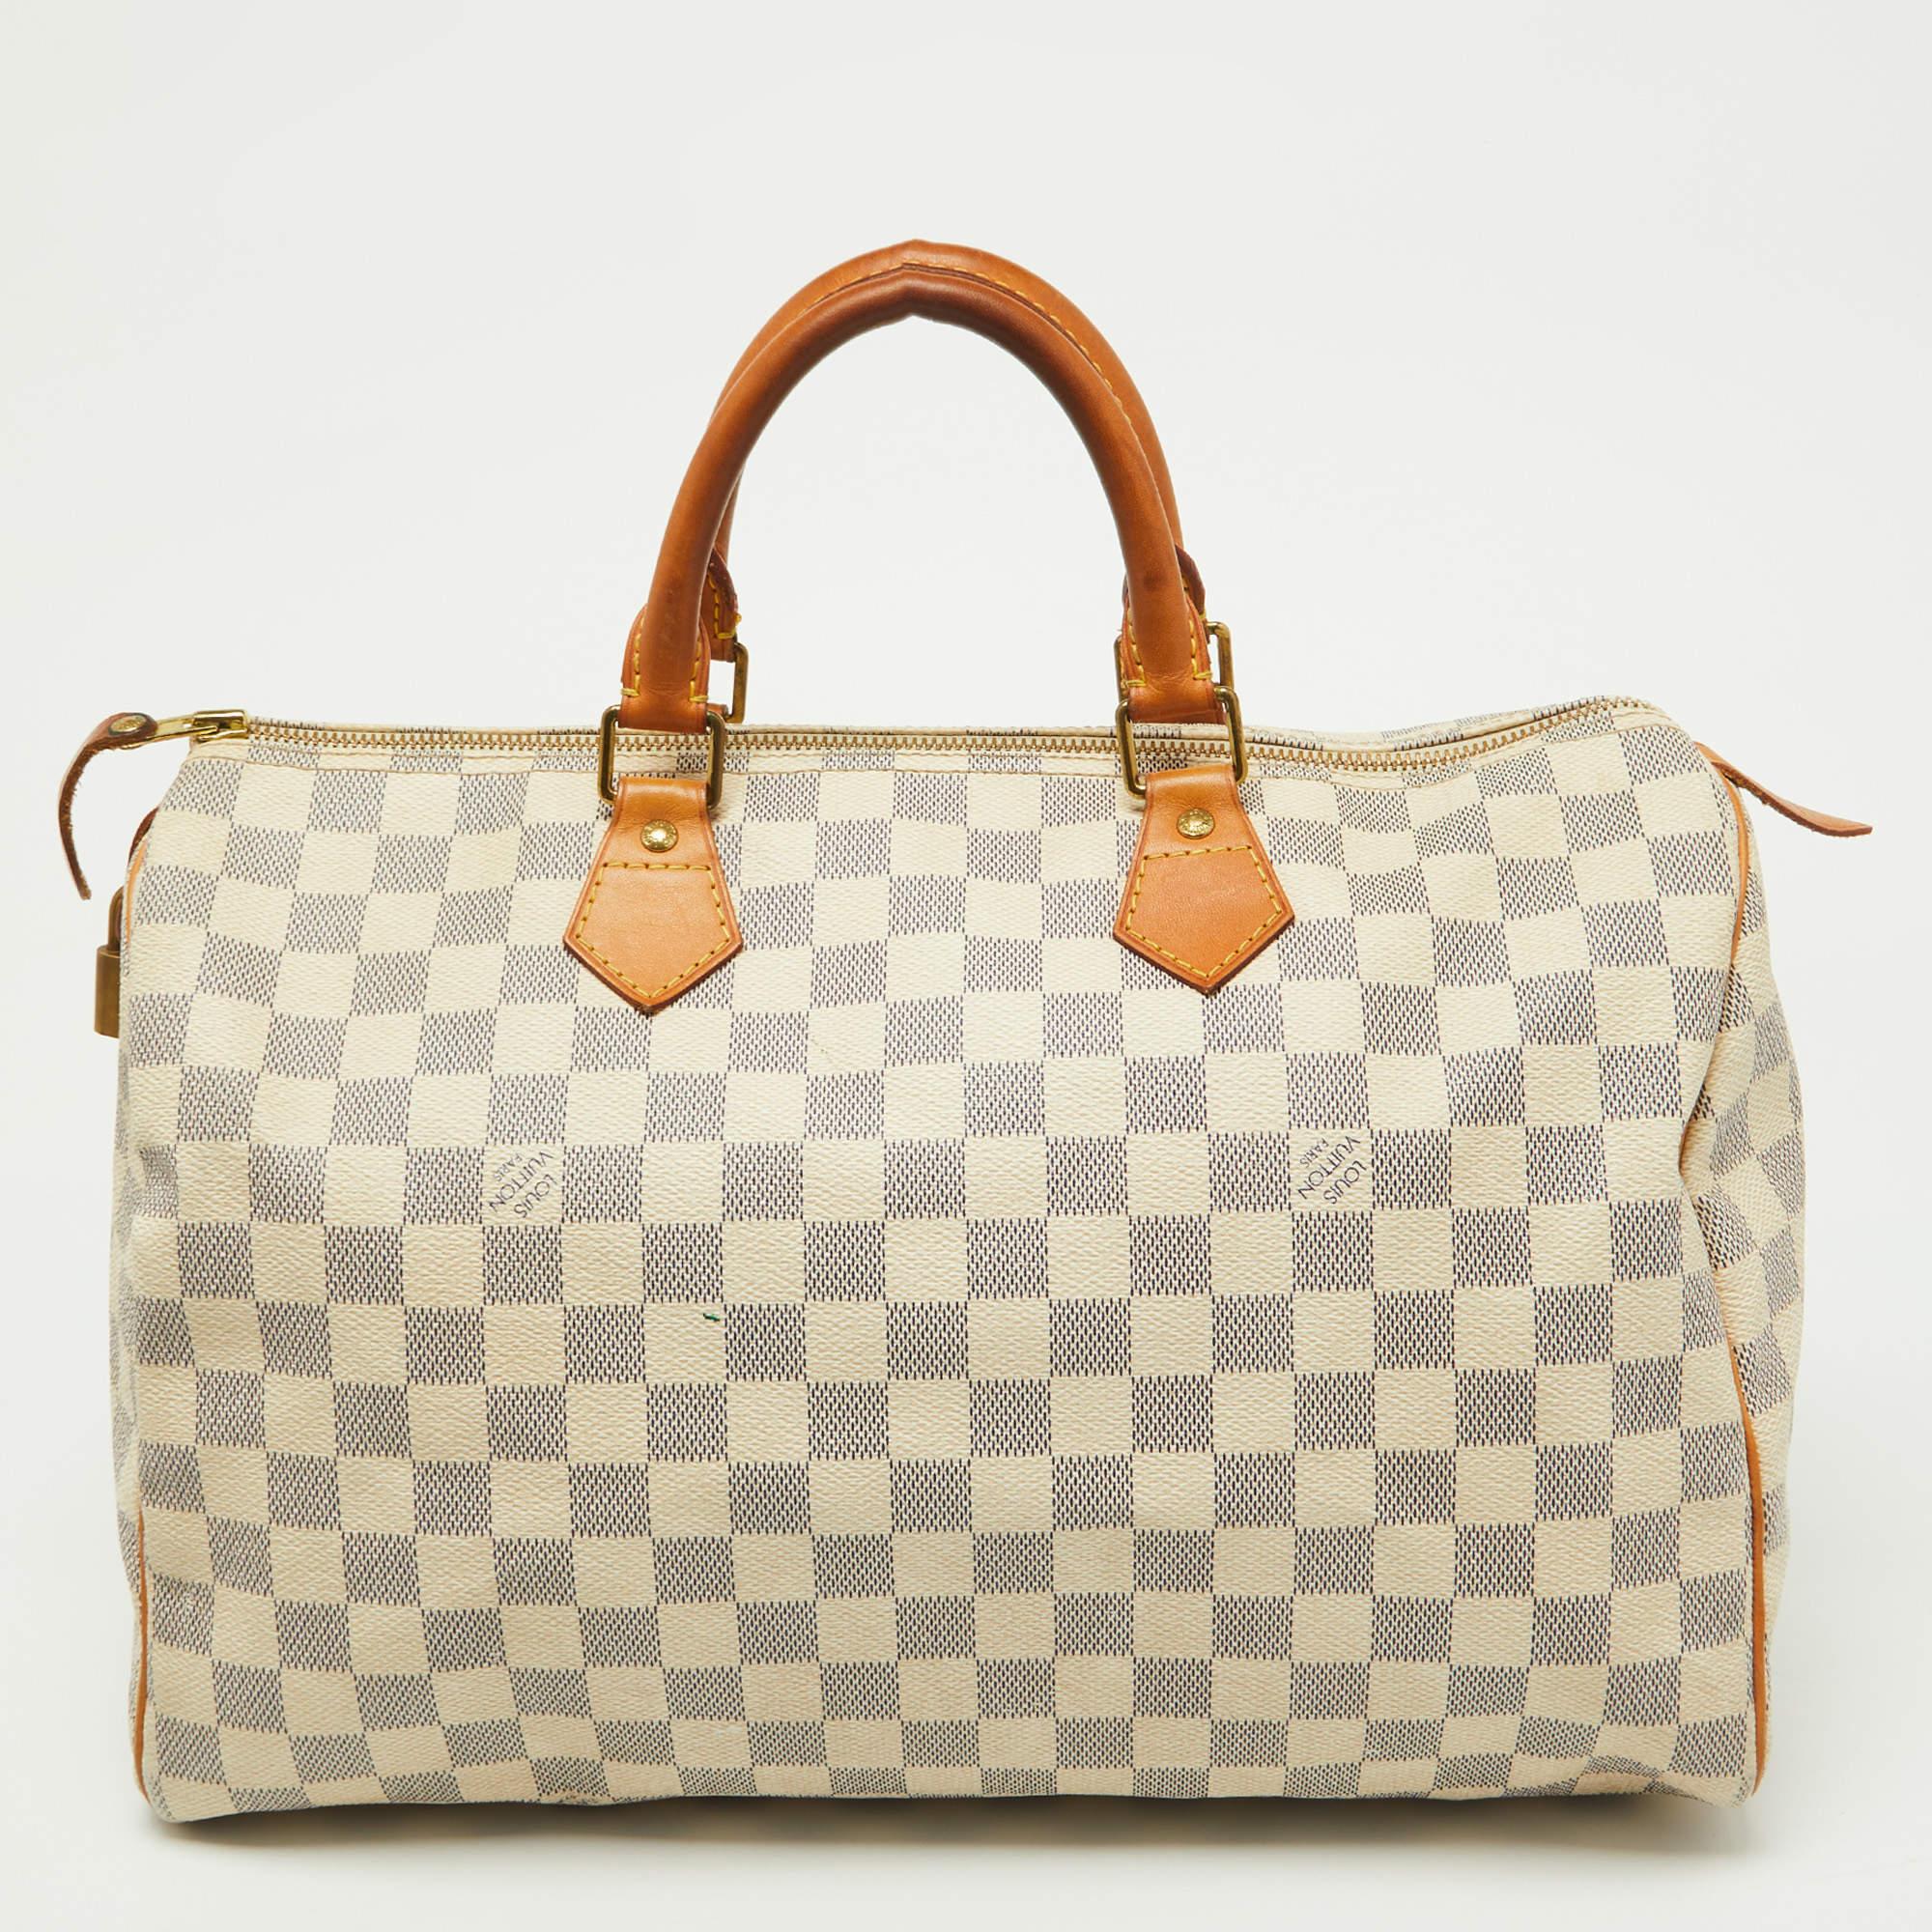 Titled as one of the greatest handbags in the history of luxury fashion, the Speedy from Louis Vuitton was first created for everyday use as a smaller version of their famous Keepall bag. This Speedy comes crafted from Damier Azur coated canvas with